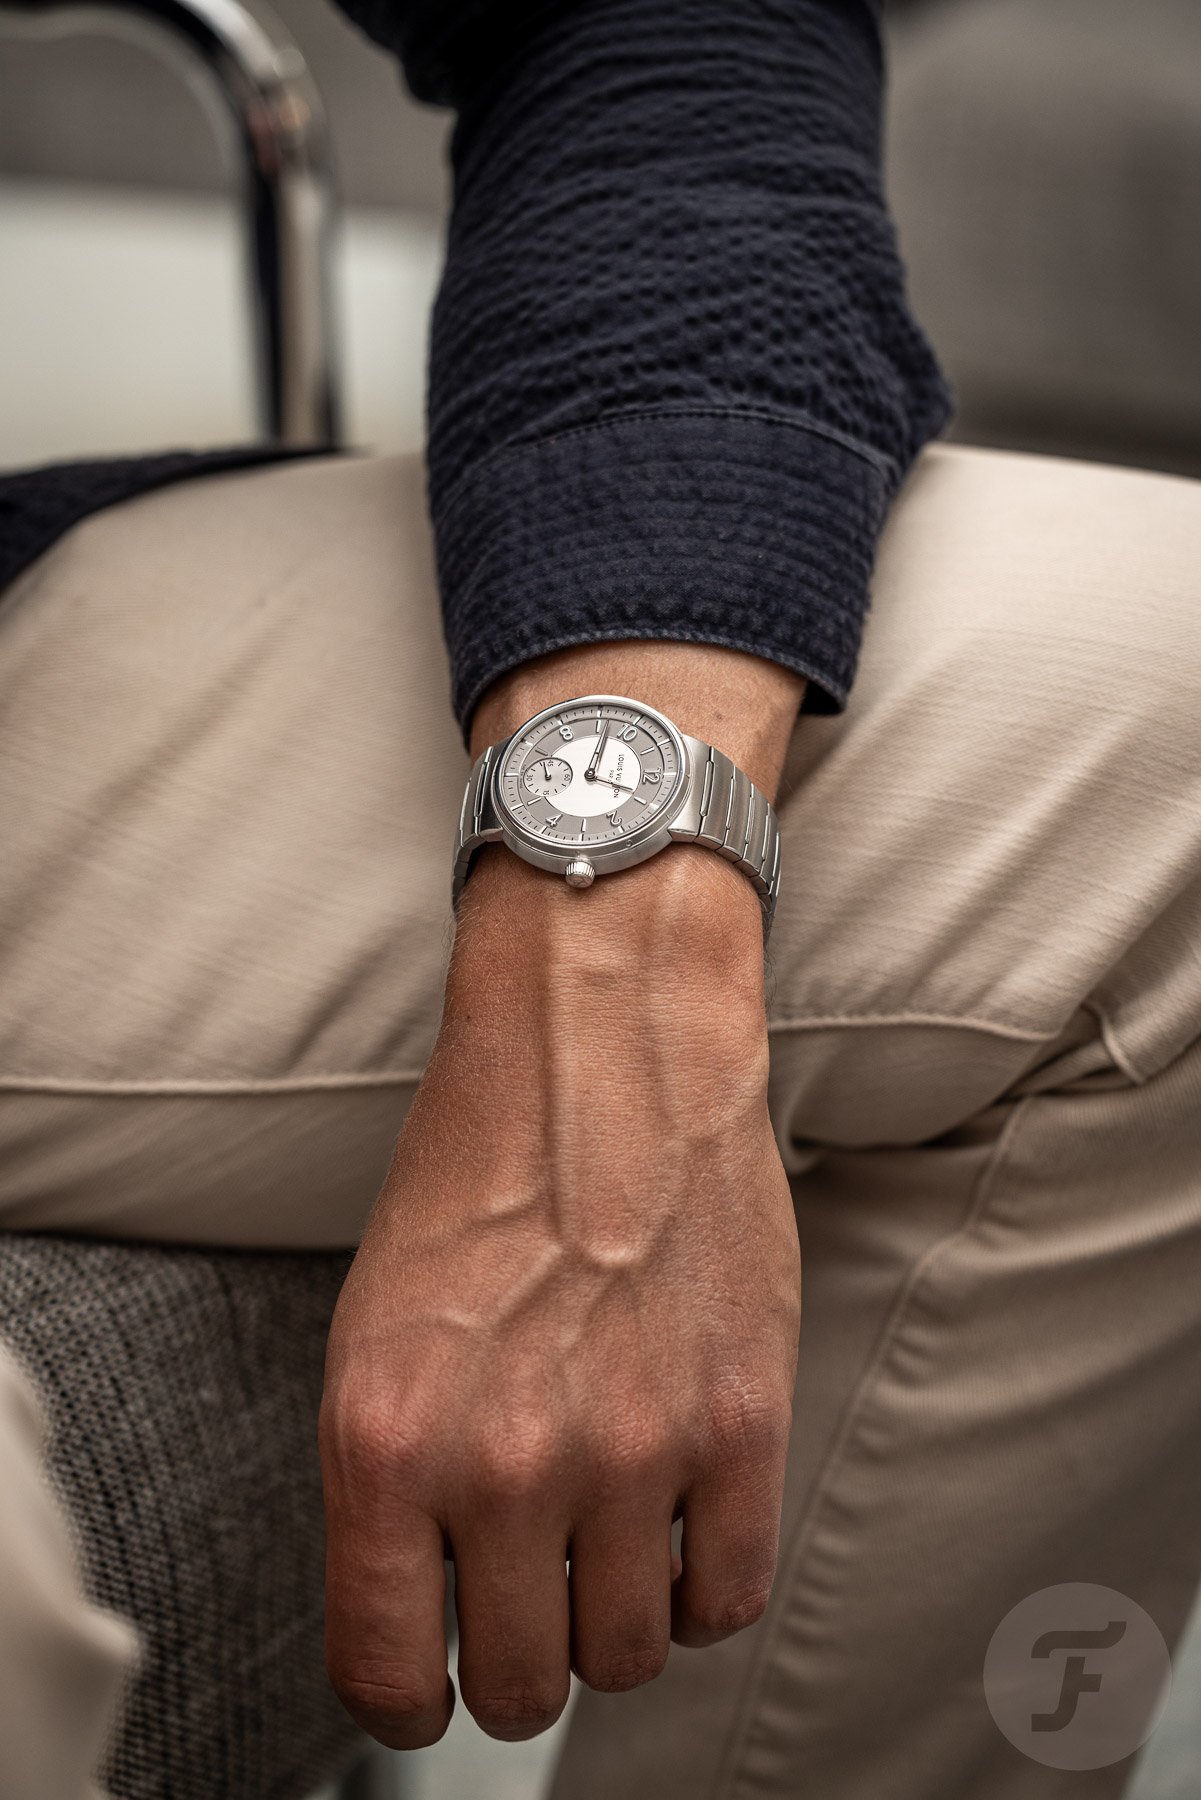 Louis Vuitton Unveils New Tambour Watch, Cuts 80 Percent of Lineup